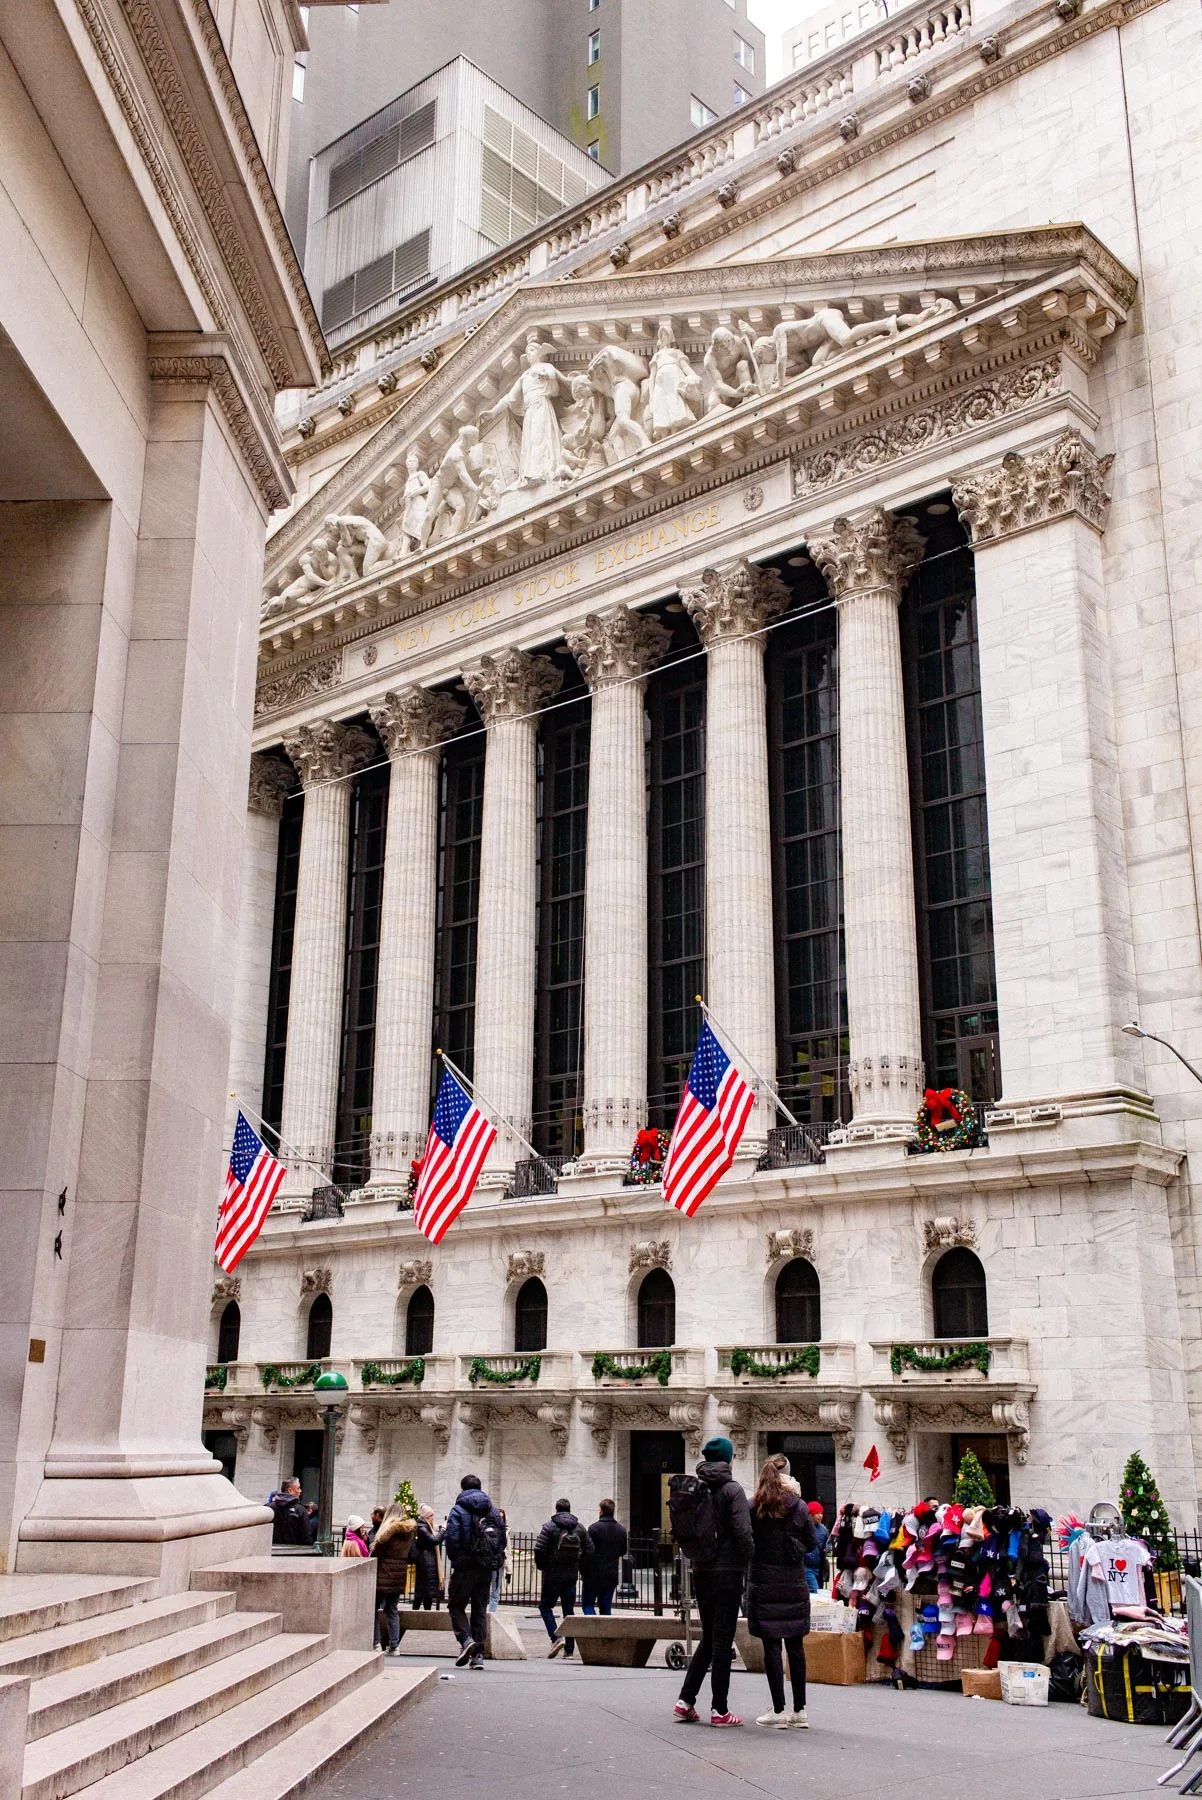 The New York Stock Exchange in the Financial District